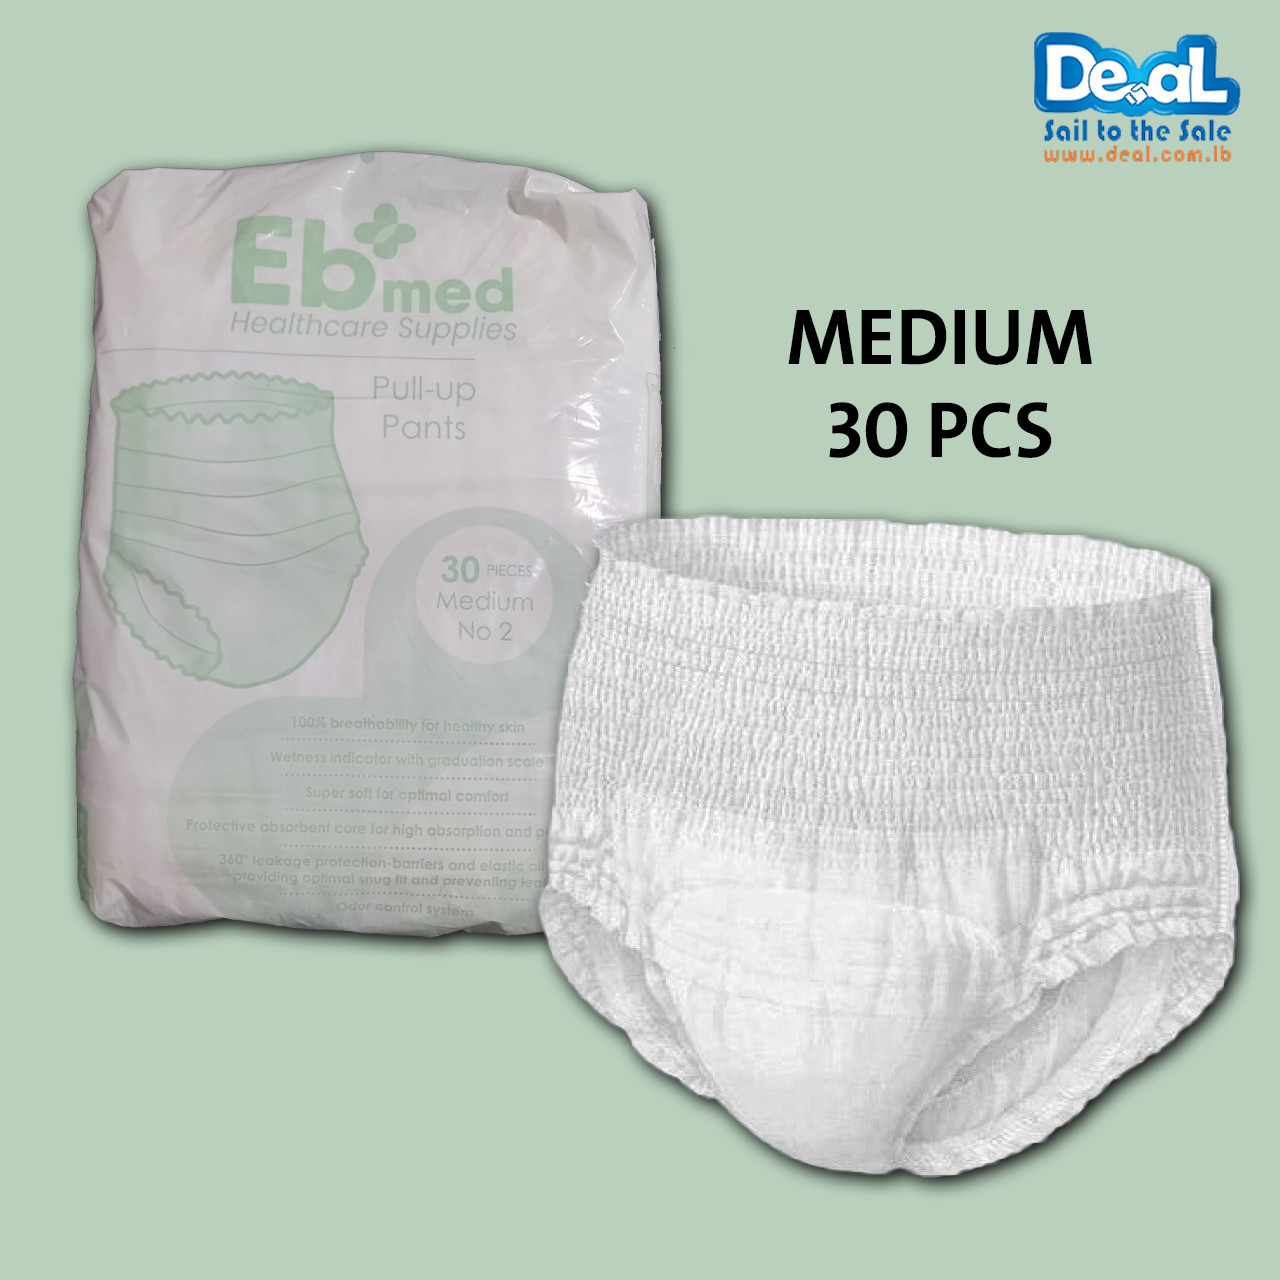 Eb med Pull-up Pants 30 Pieces